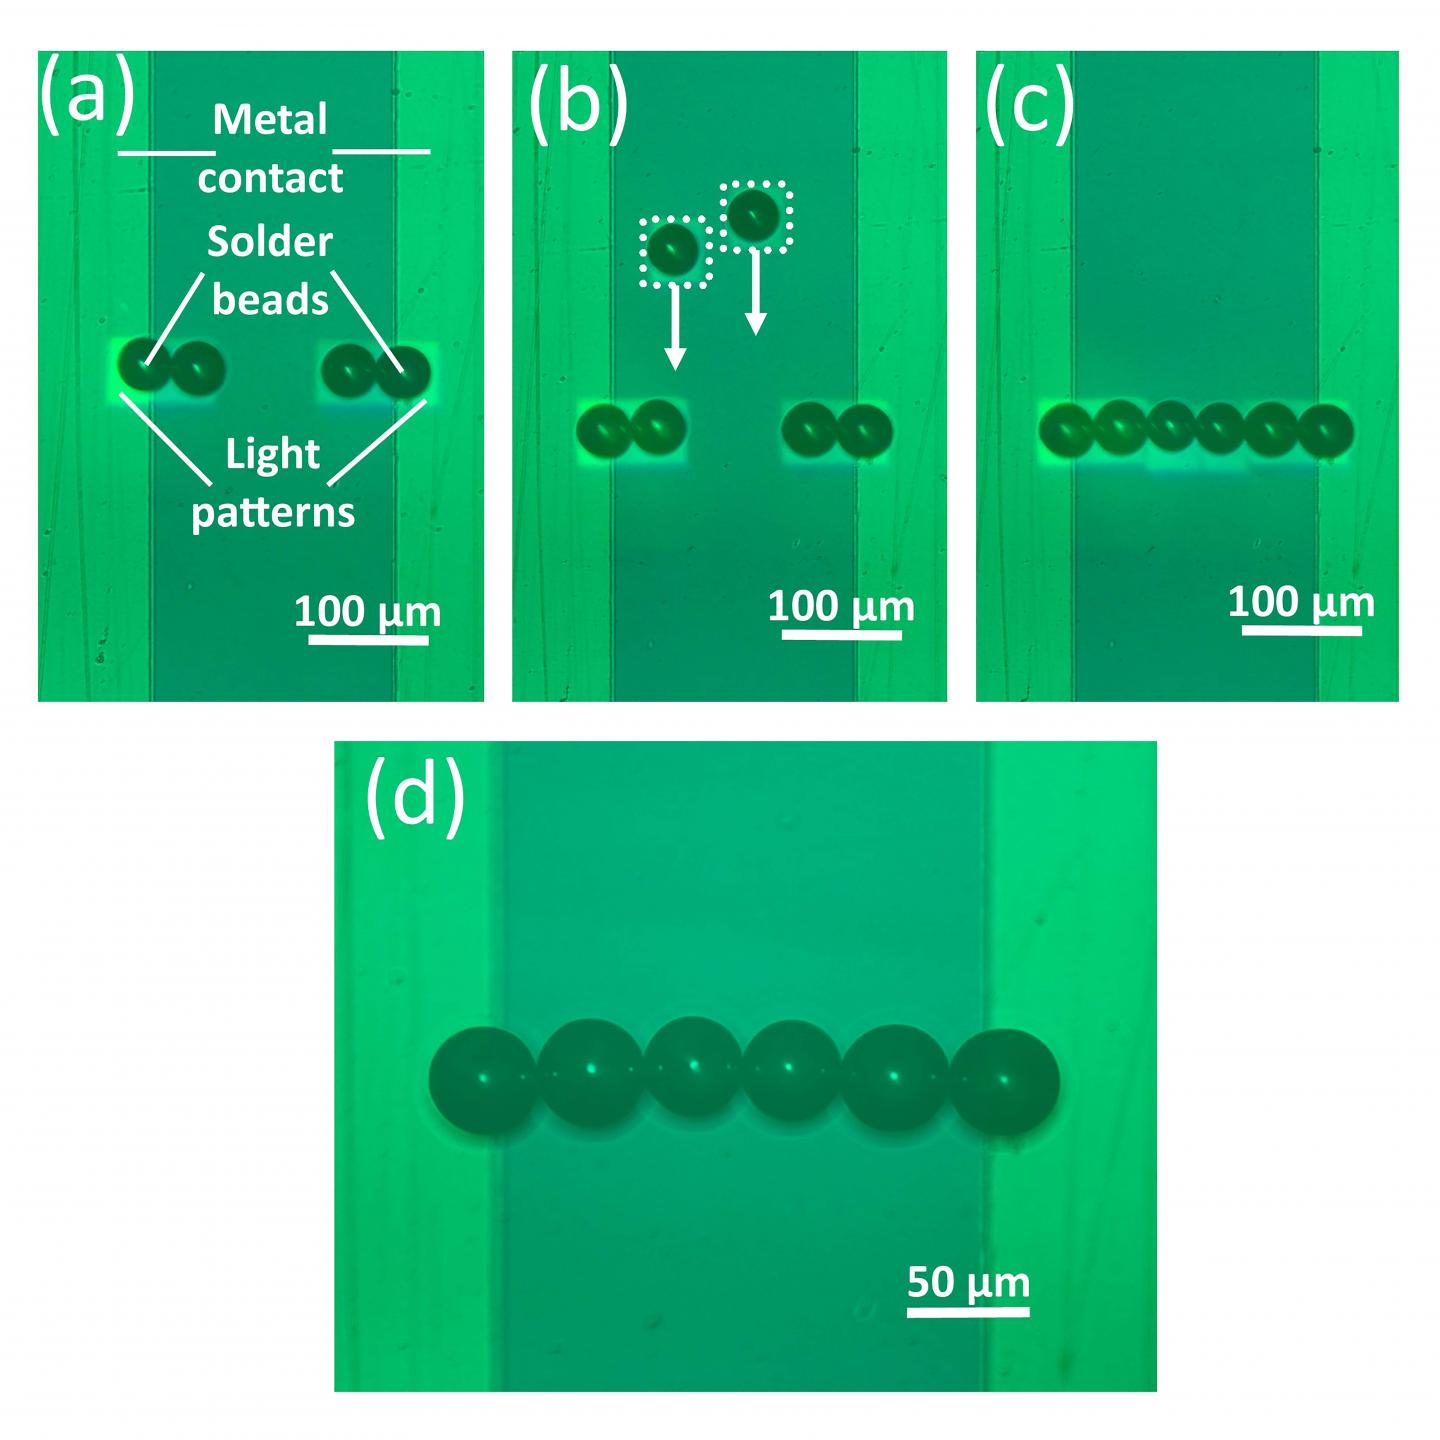 Researchers used optoelectronic tweezers to assemble a line of solder beads